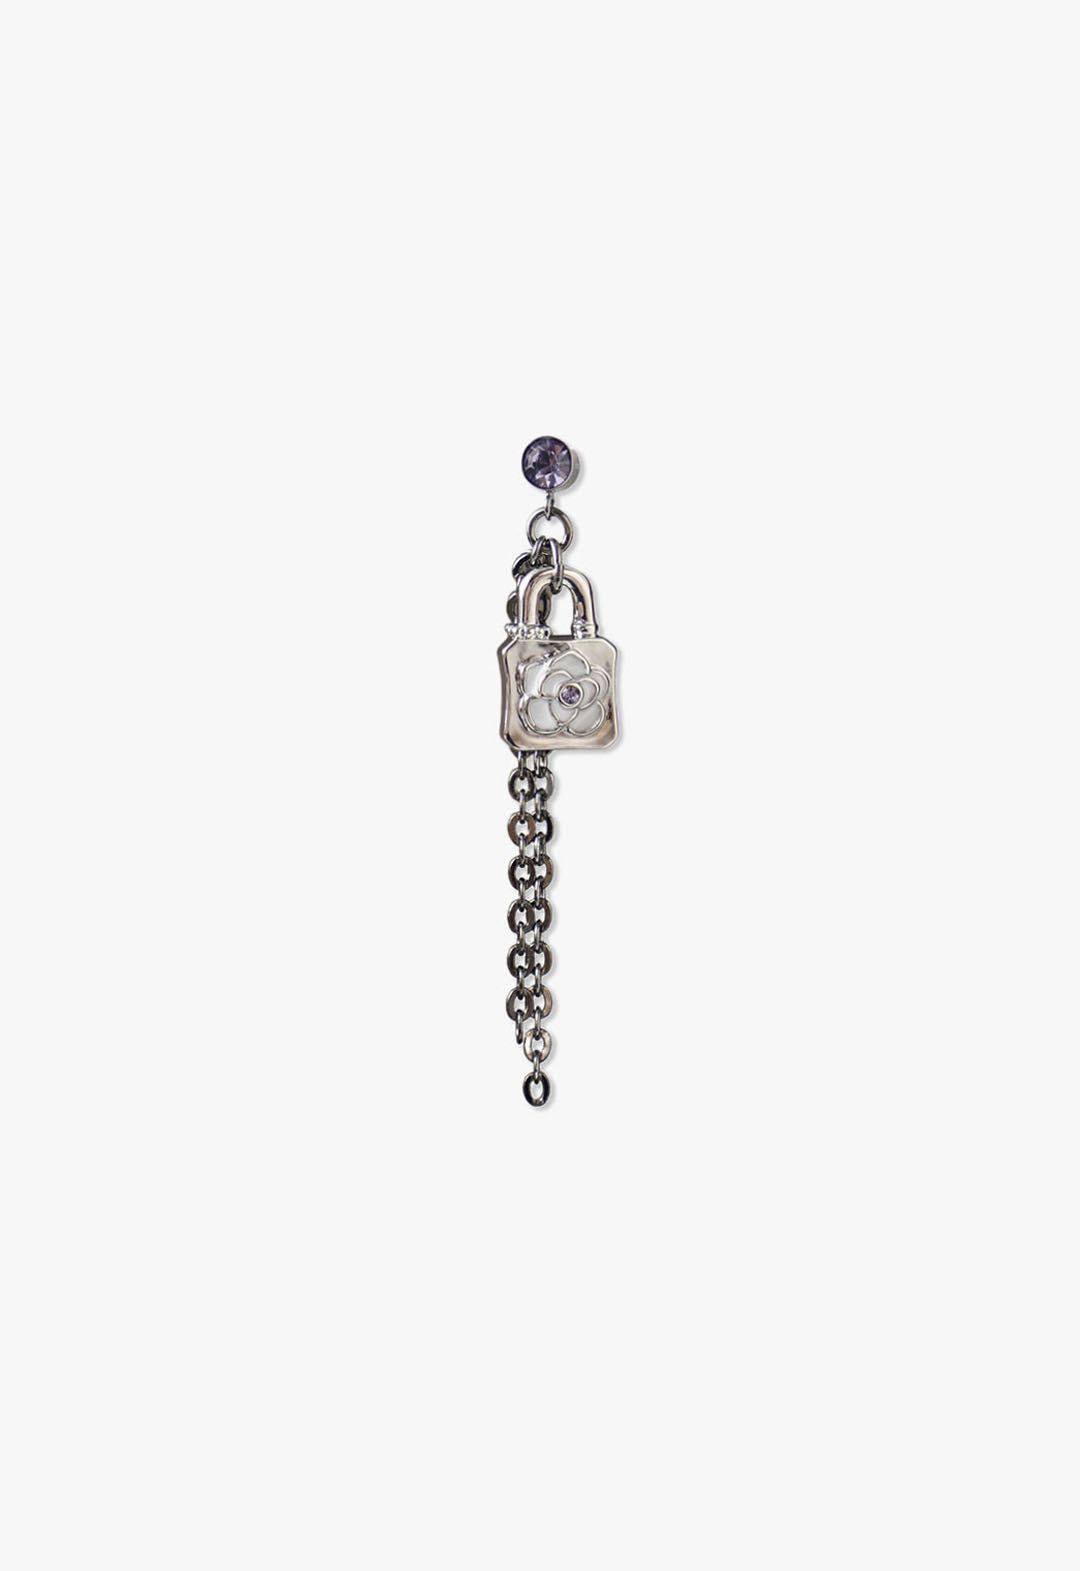 Large silver chain links, one lock with a white rose and blue stone, come with a blue stone